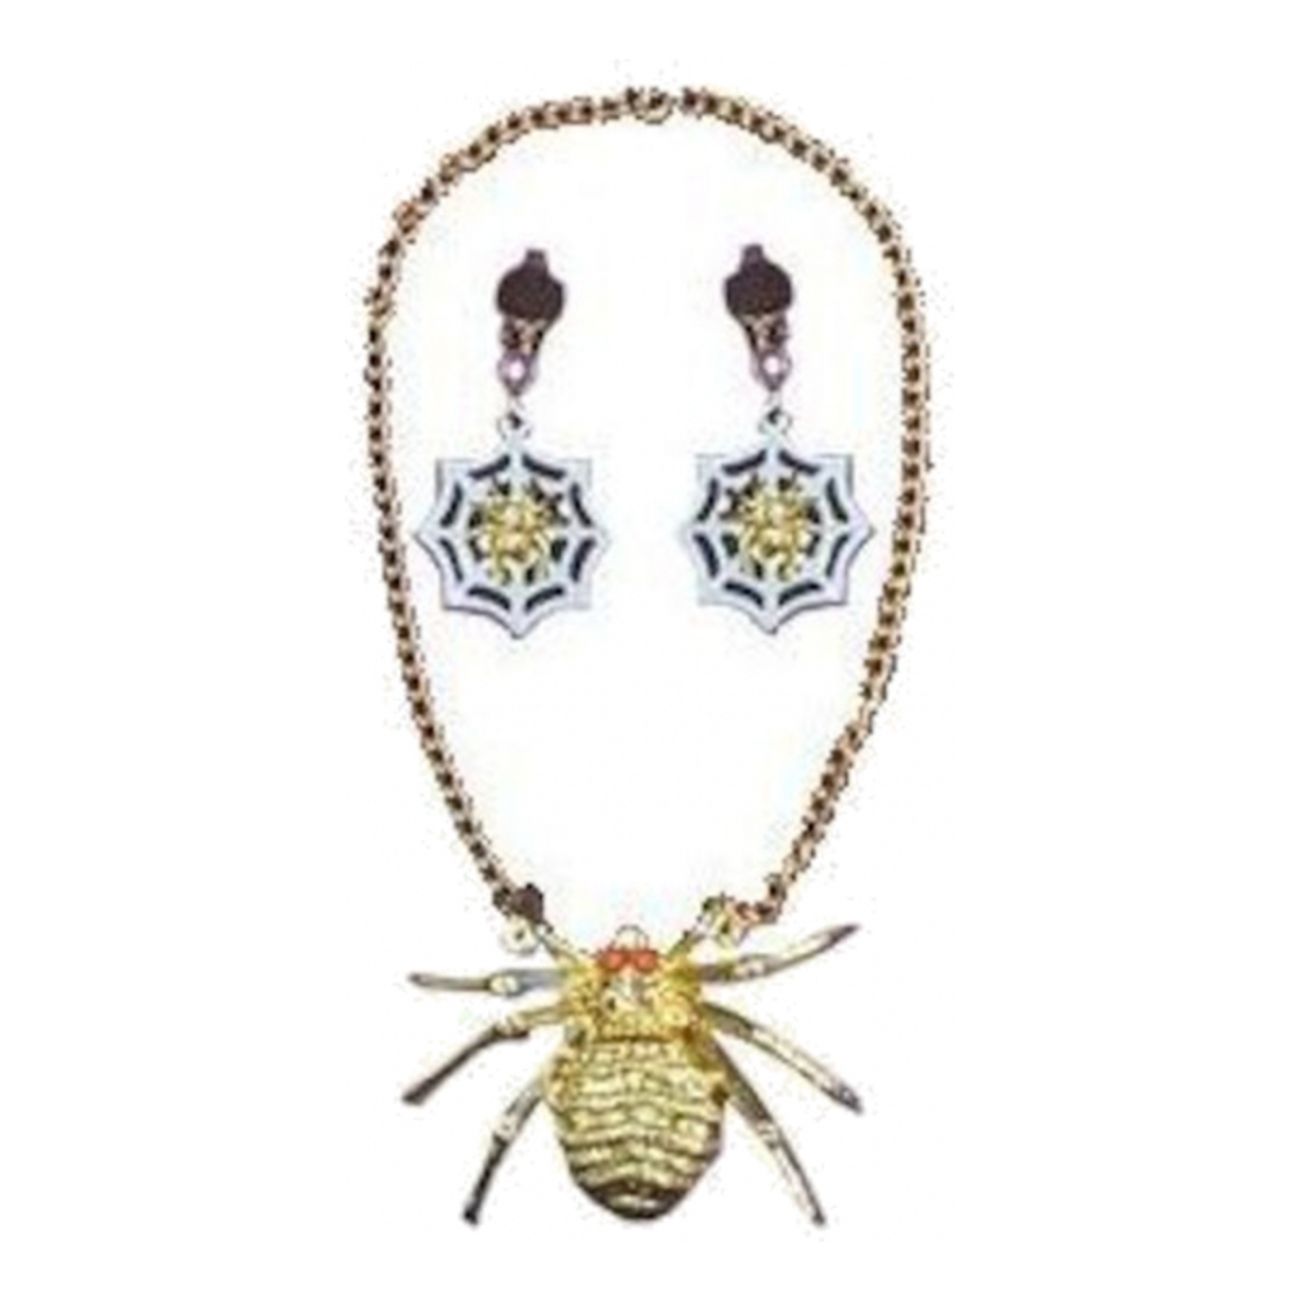 spider-necklace-earring-set-1